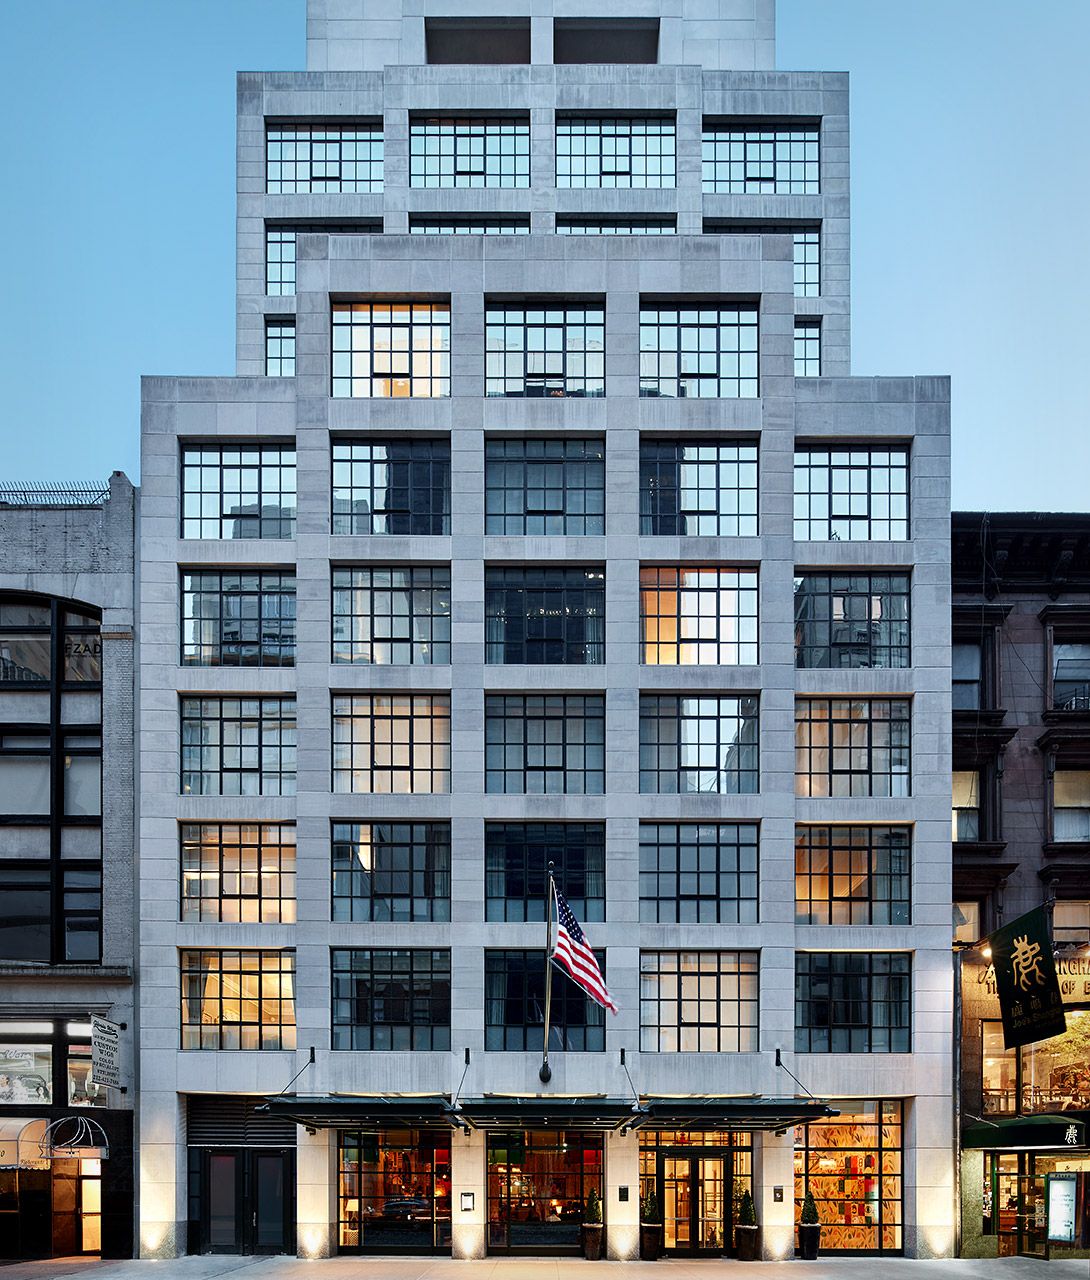 The Whitby Hotel Façade in New York